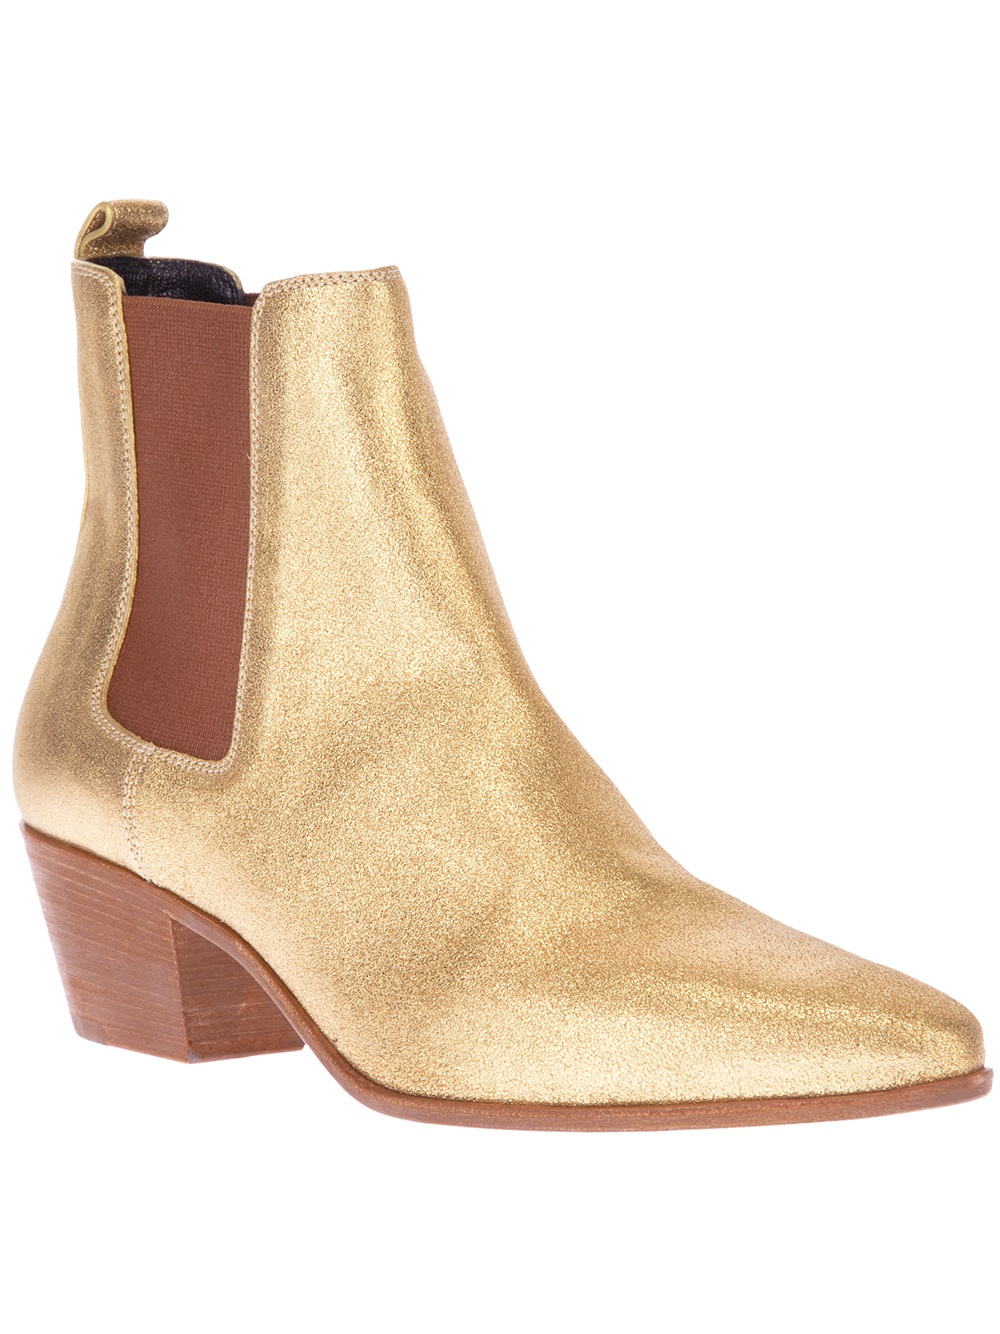 Saint Laurent Chelsea Ankle Boot in Gold | Lyst